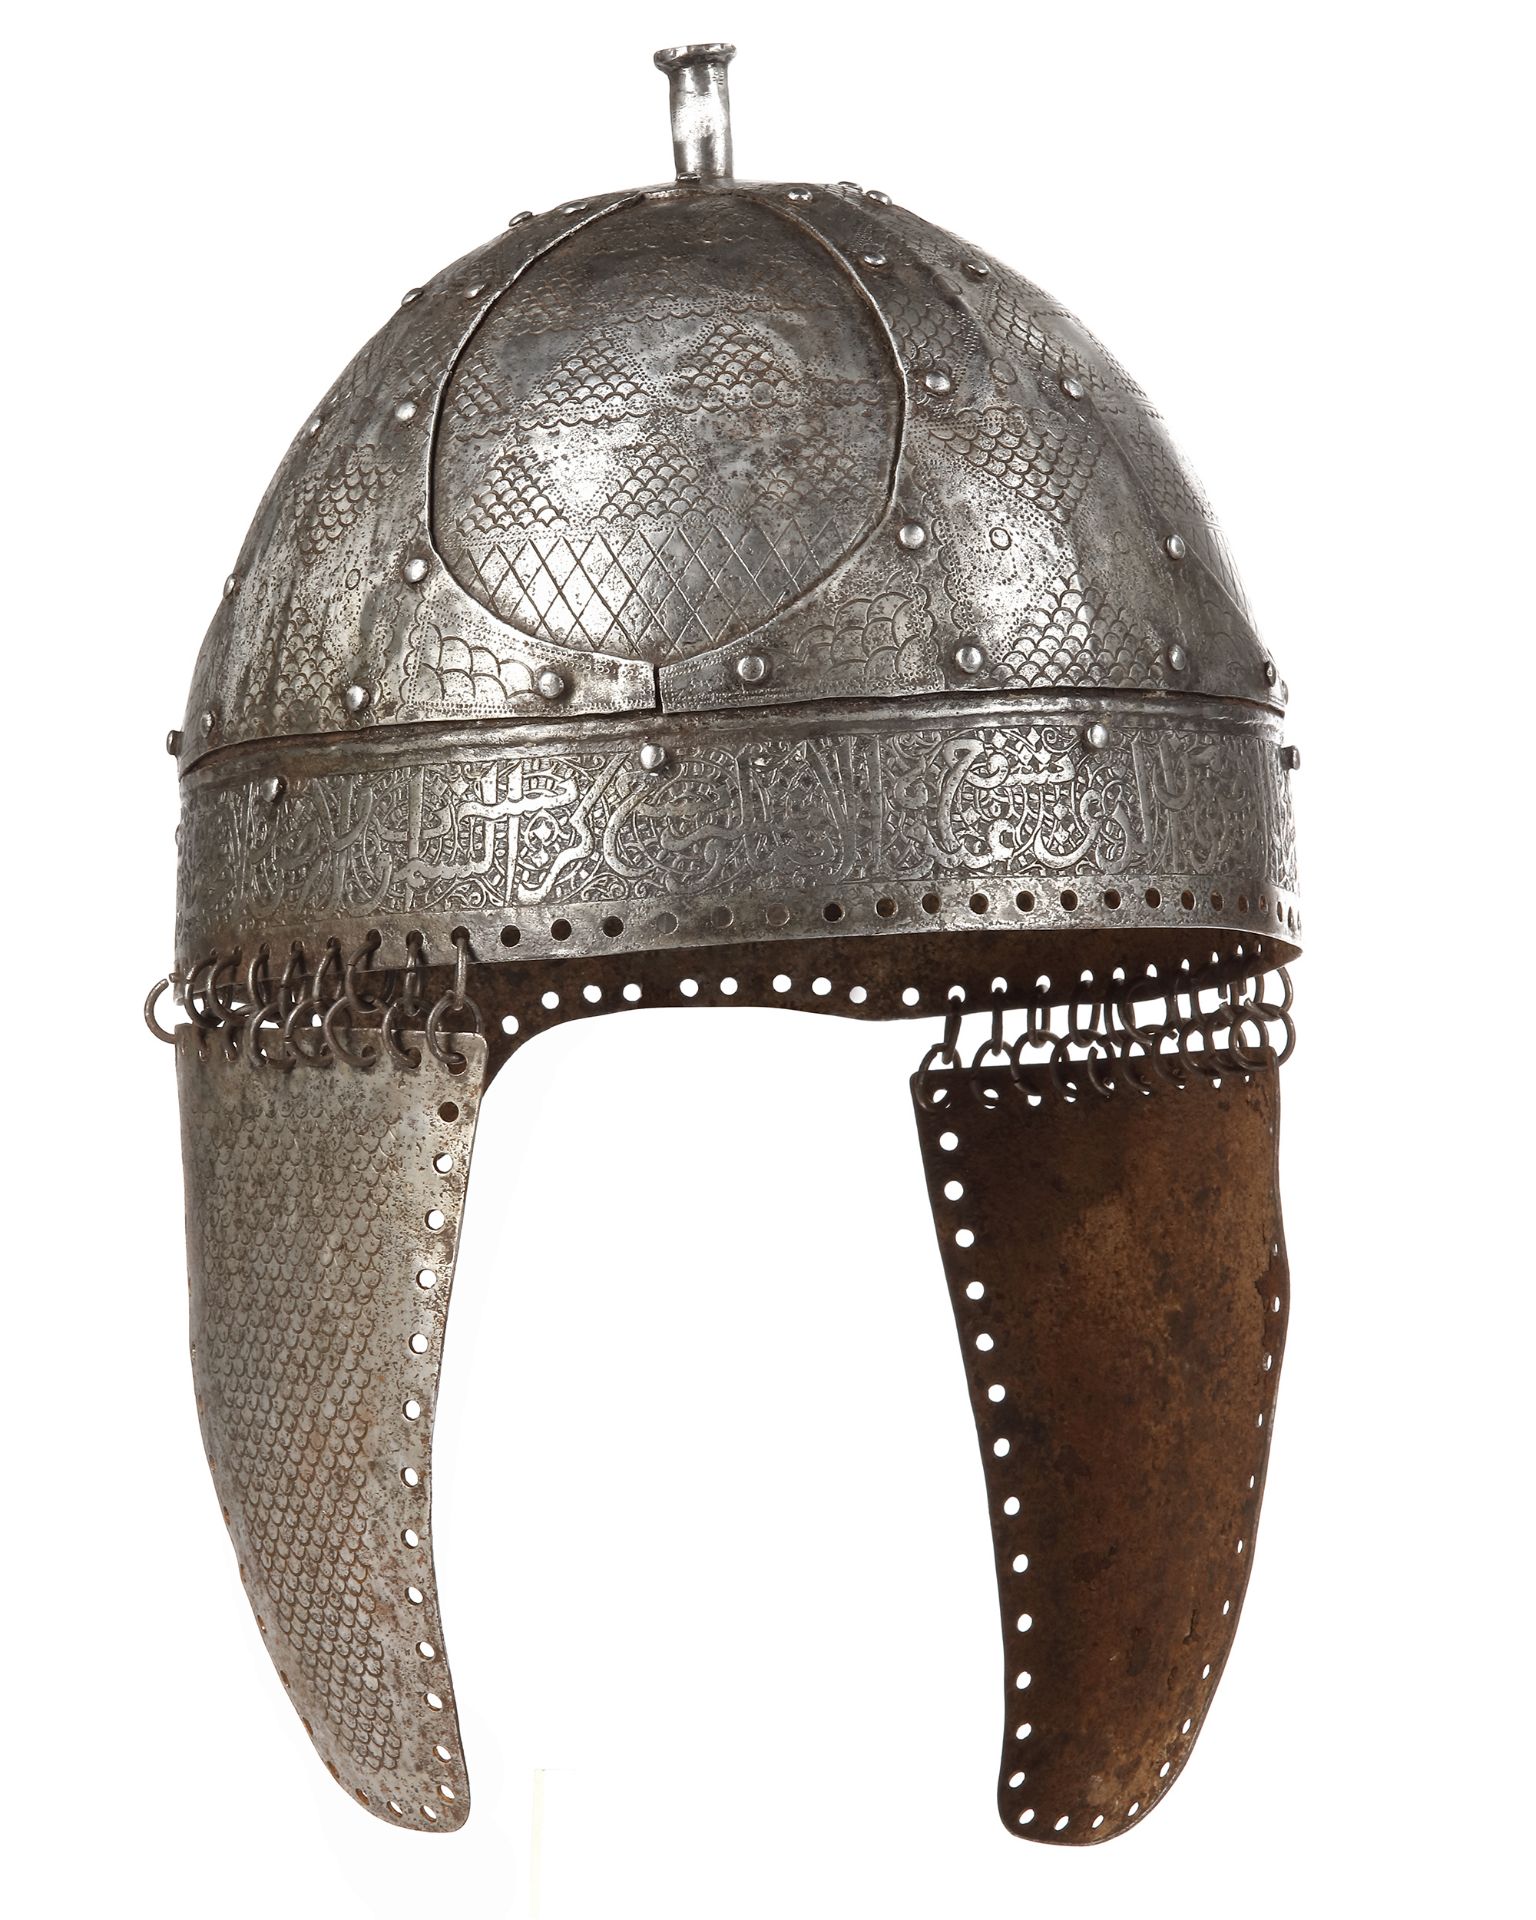 A STEEL HELMET, MUGHAL, INDIA, 17TH-18TH CENTURY - Image 5 of 12